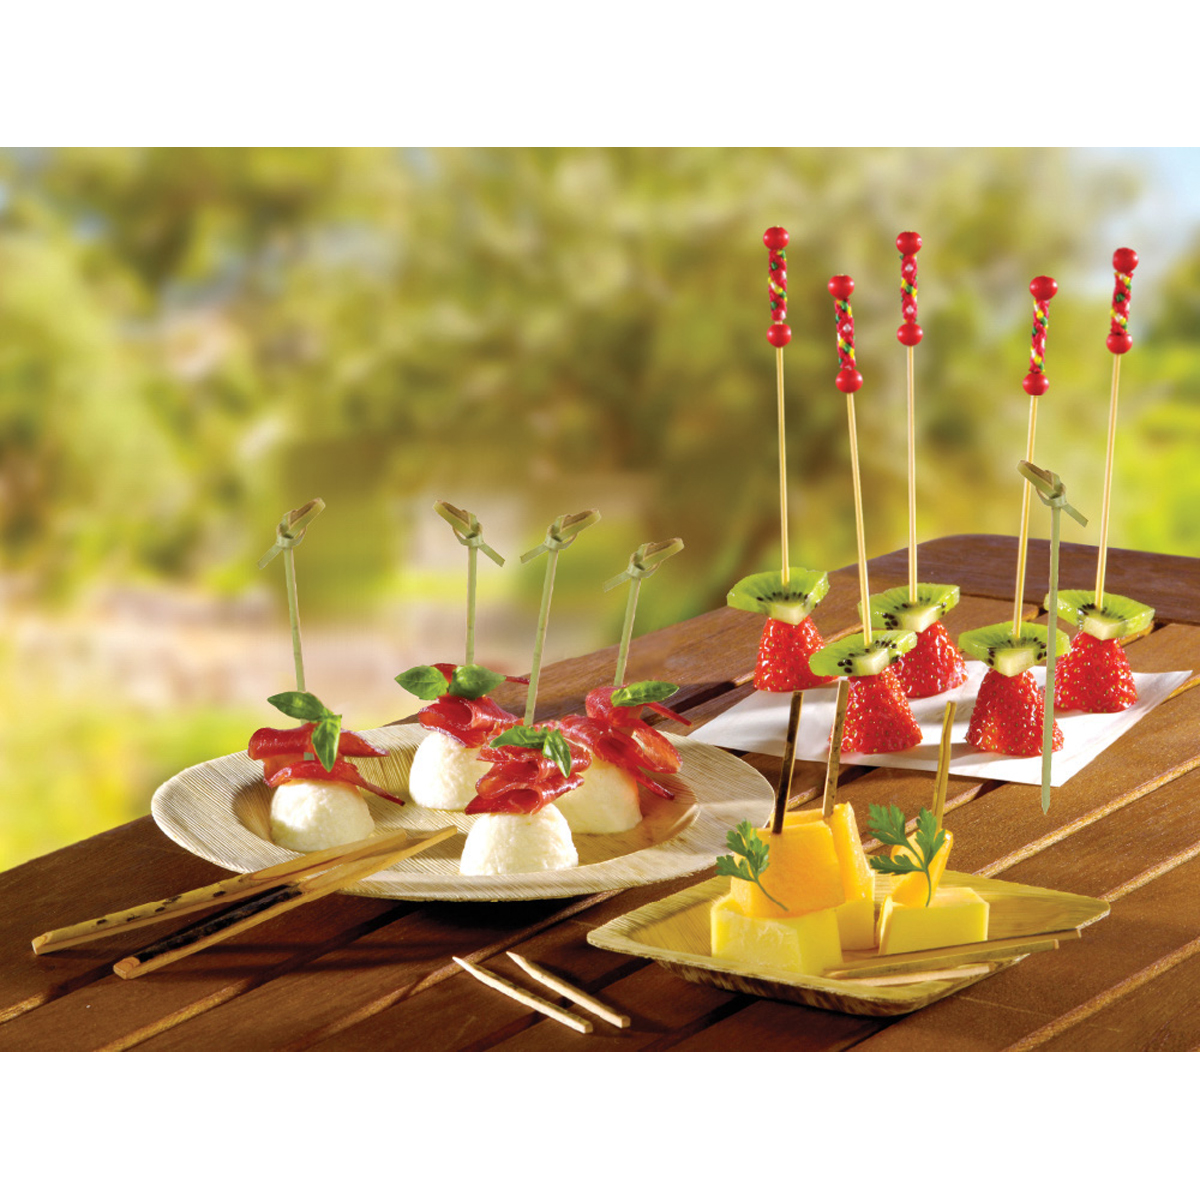 Packnwood Bamboo Knotted Skewer 5.9" - Case Of 2000 image 2